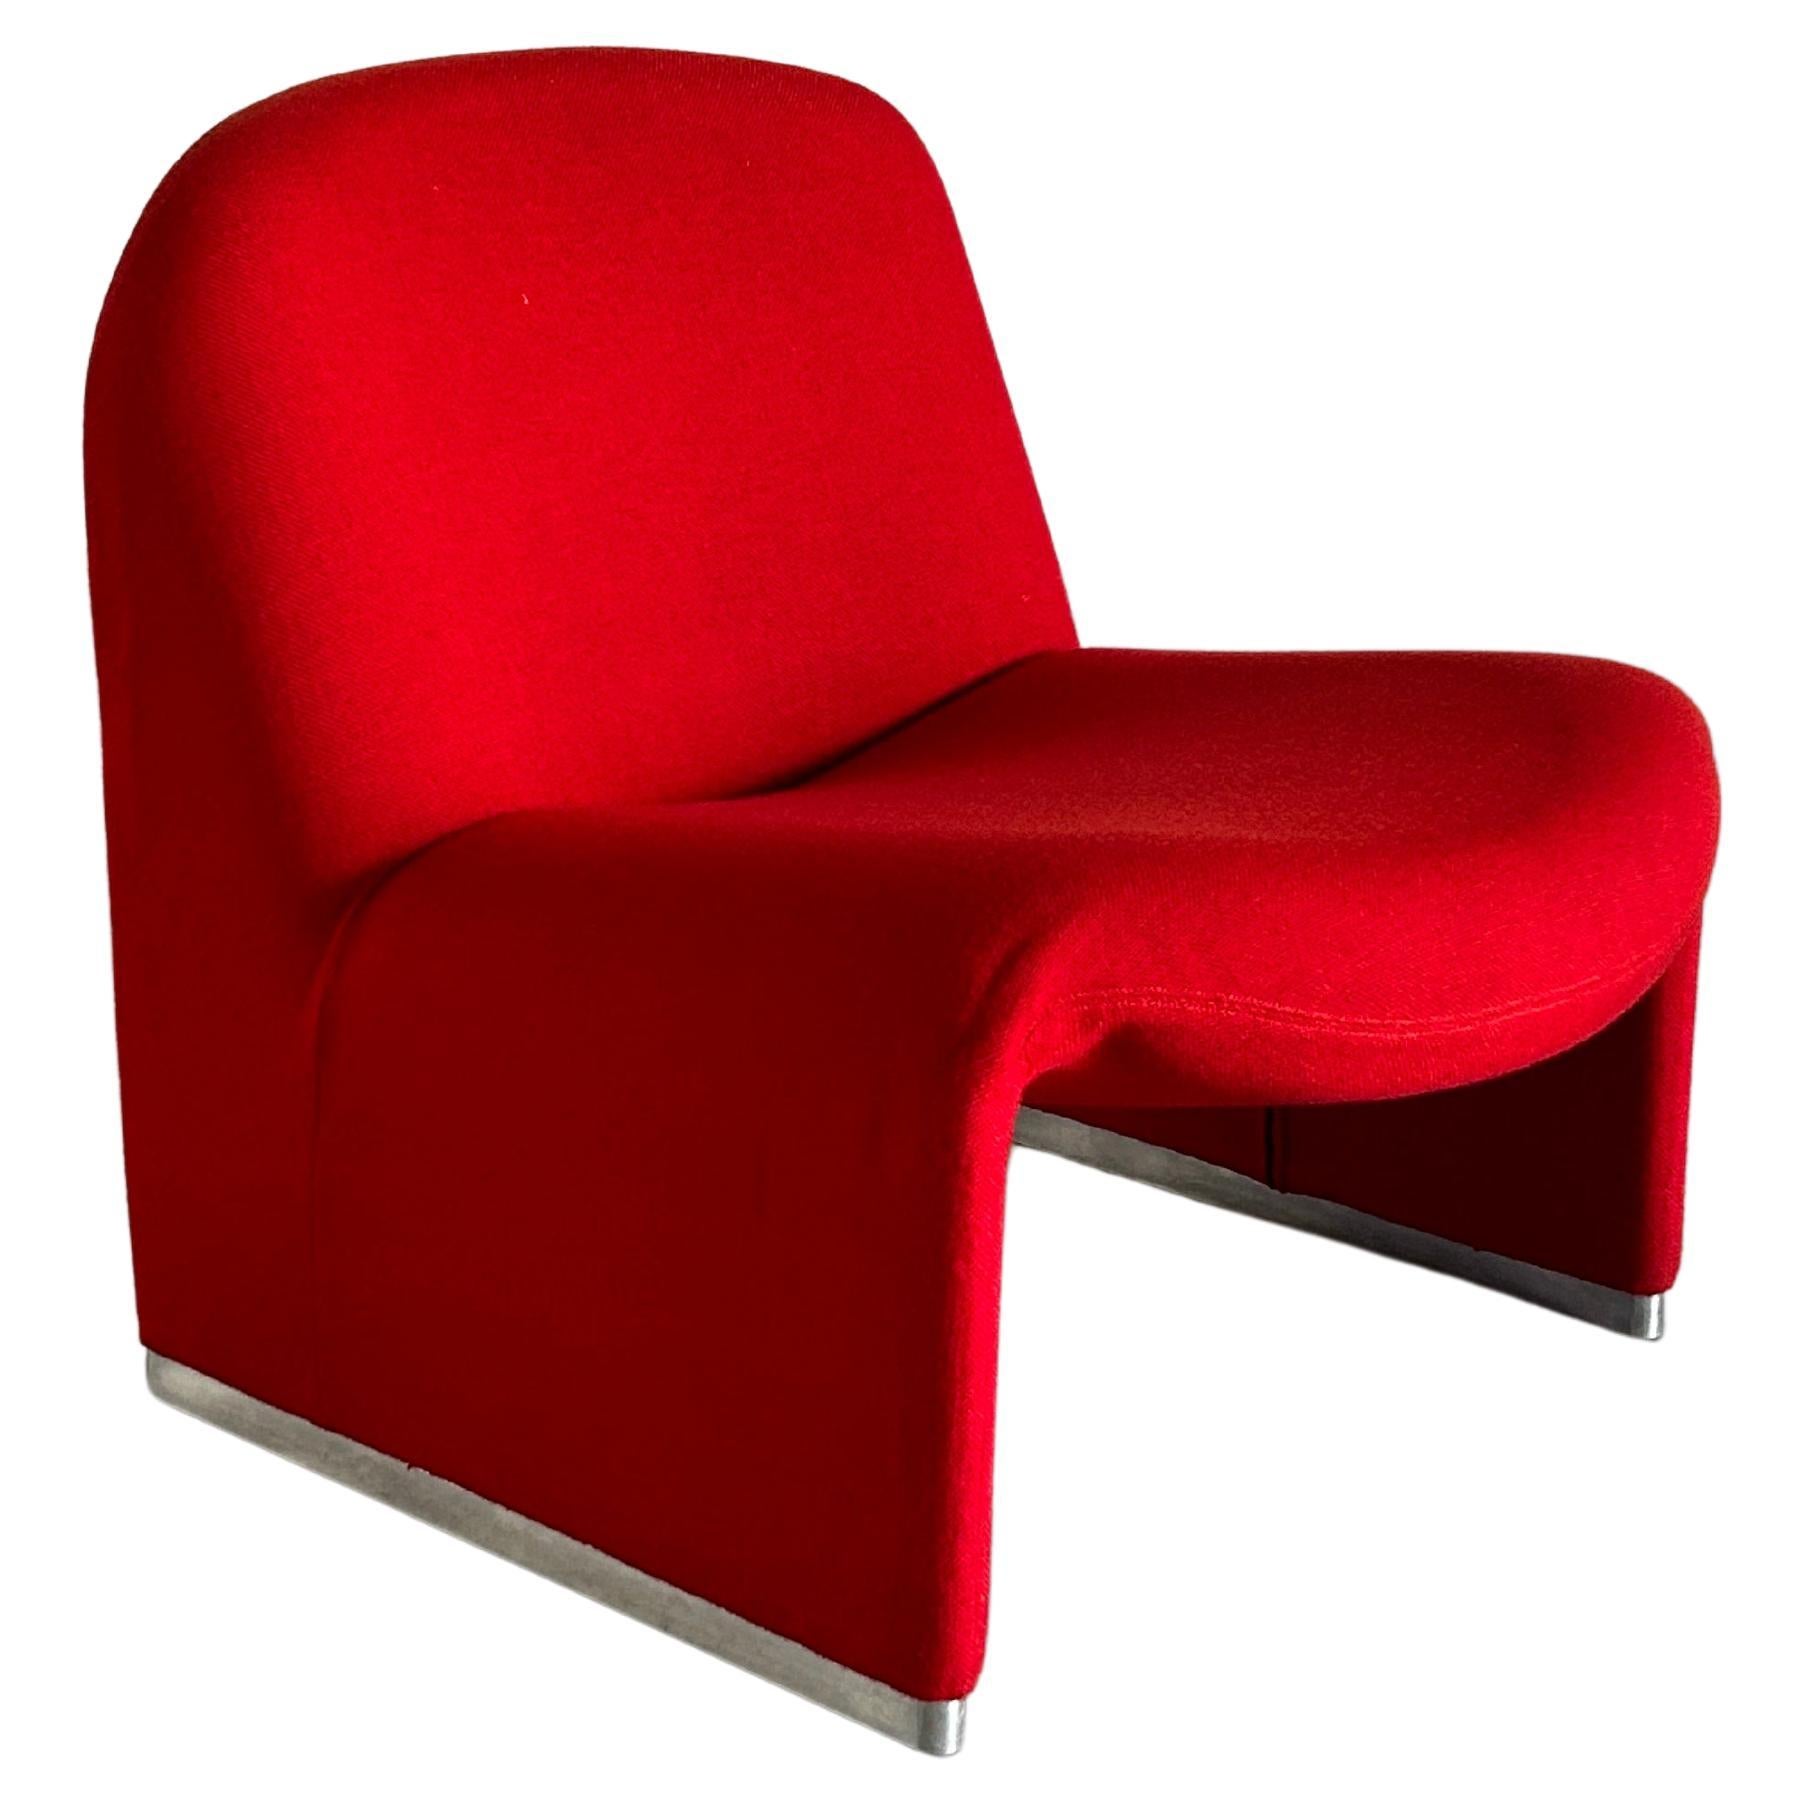 Iconic 'Alky' chair by Giancarlo Piretti for Anonima Castelli, Red Fabric, 1970s